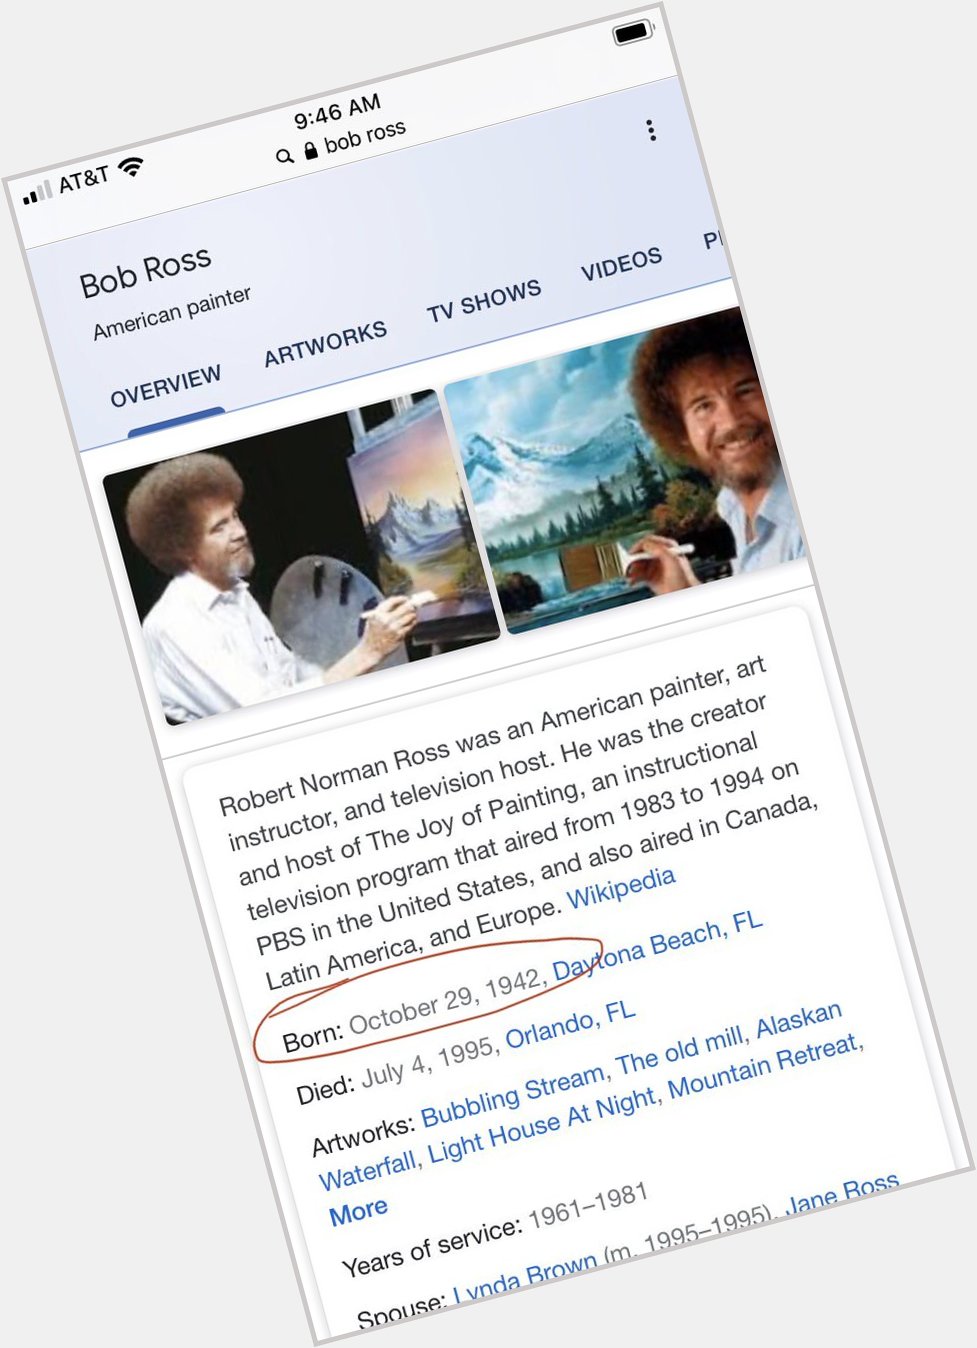 Happy birthday, old friend! Bob Ross would ve been 77 today. 